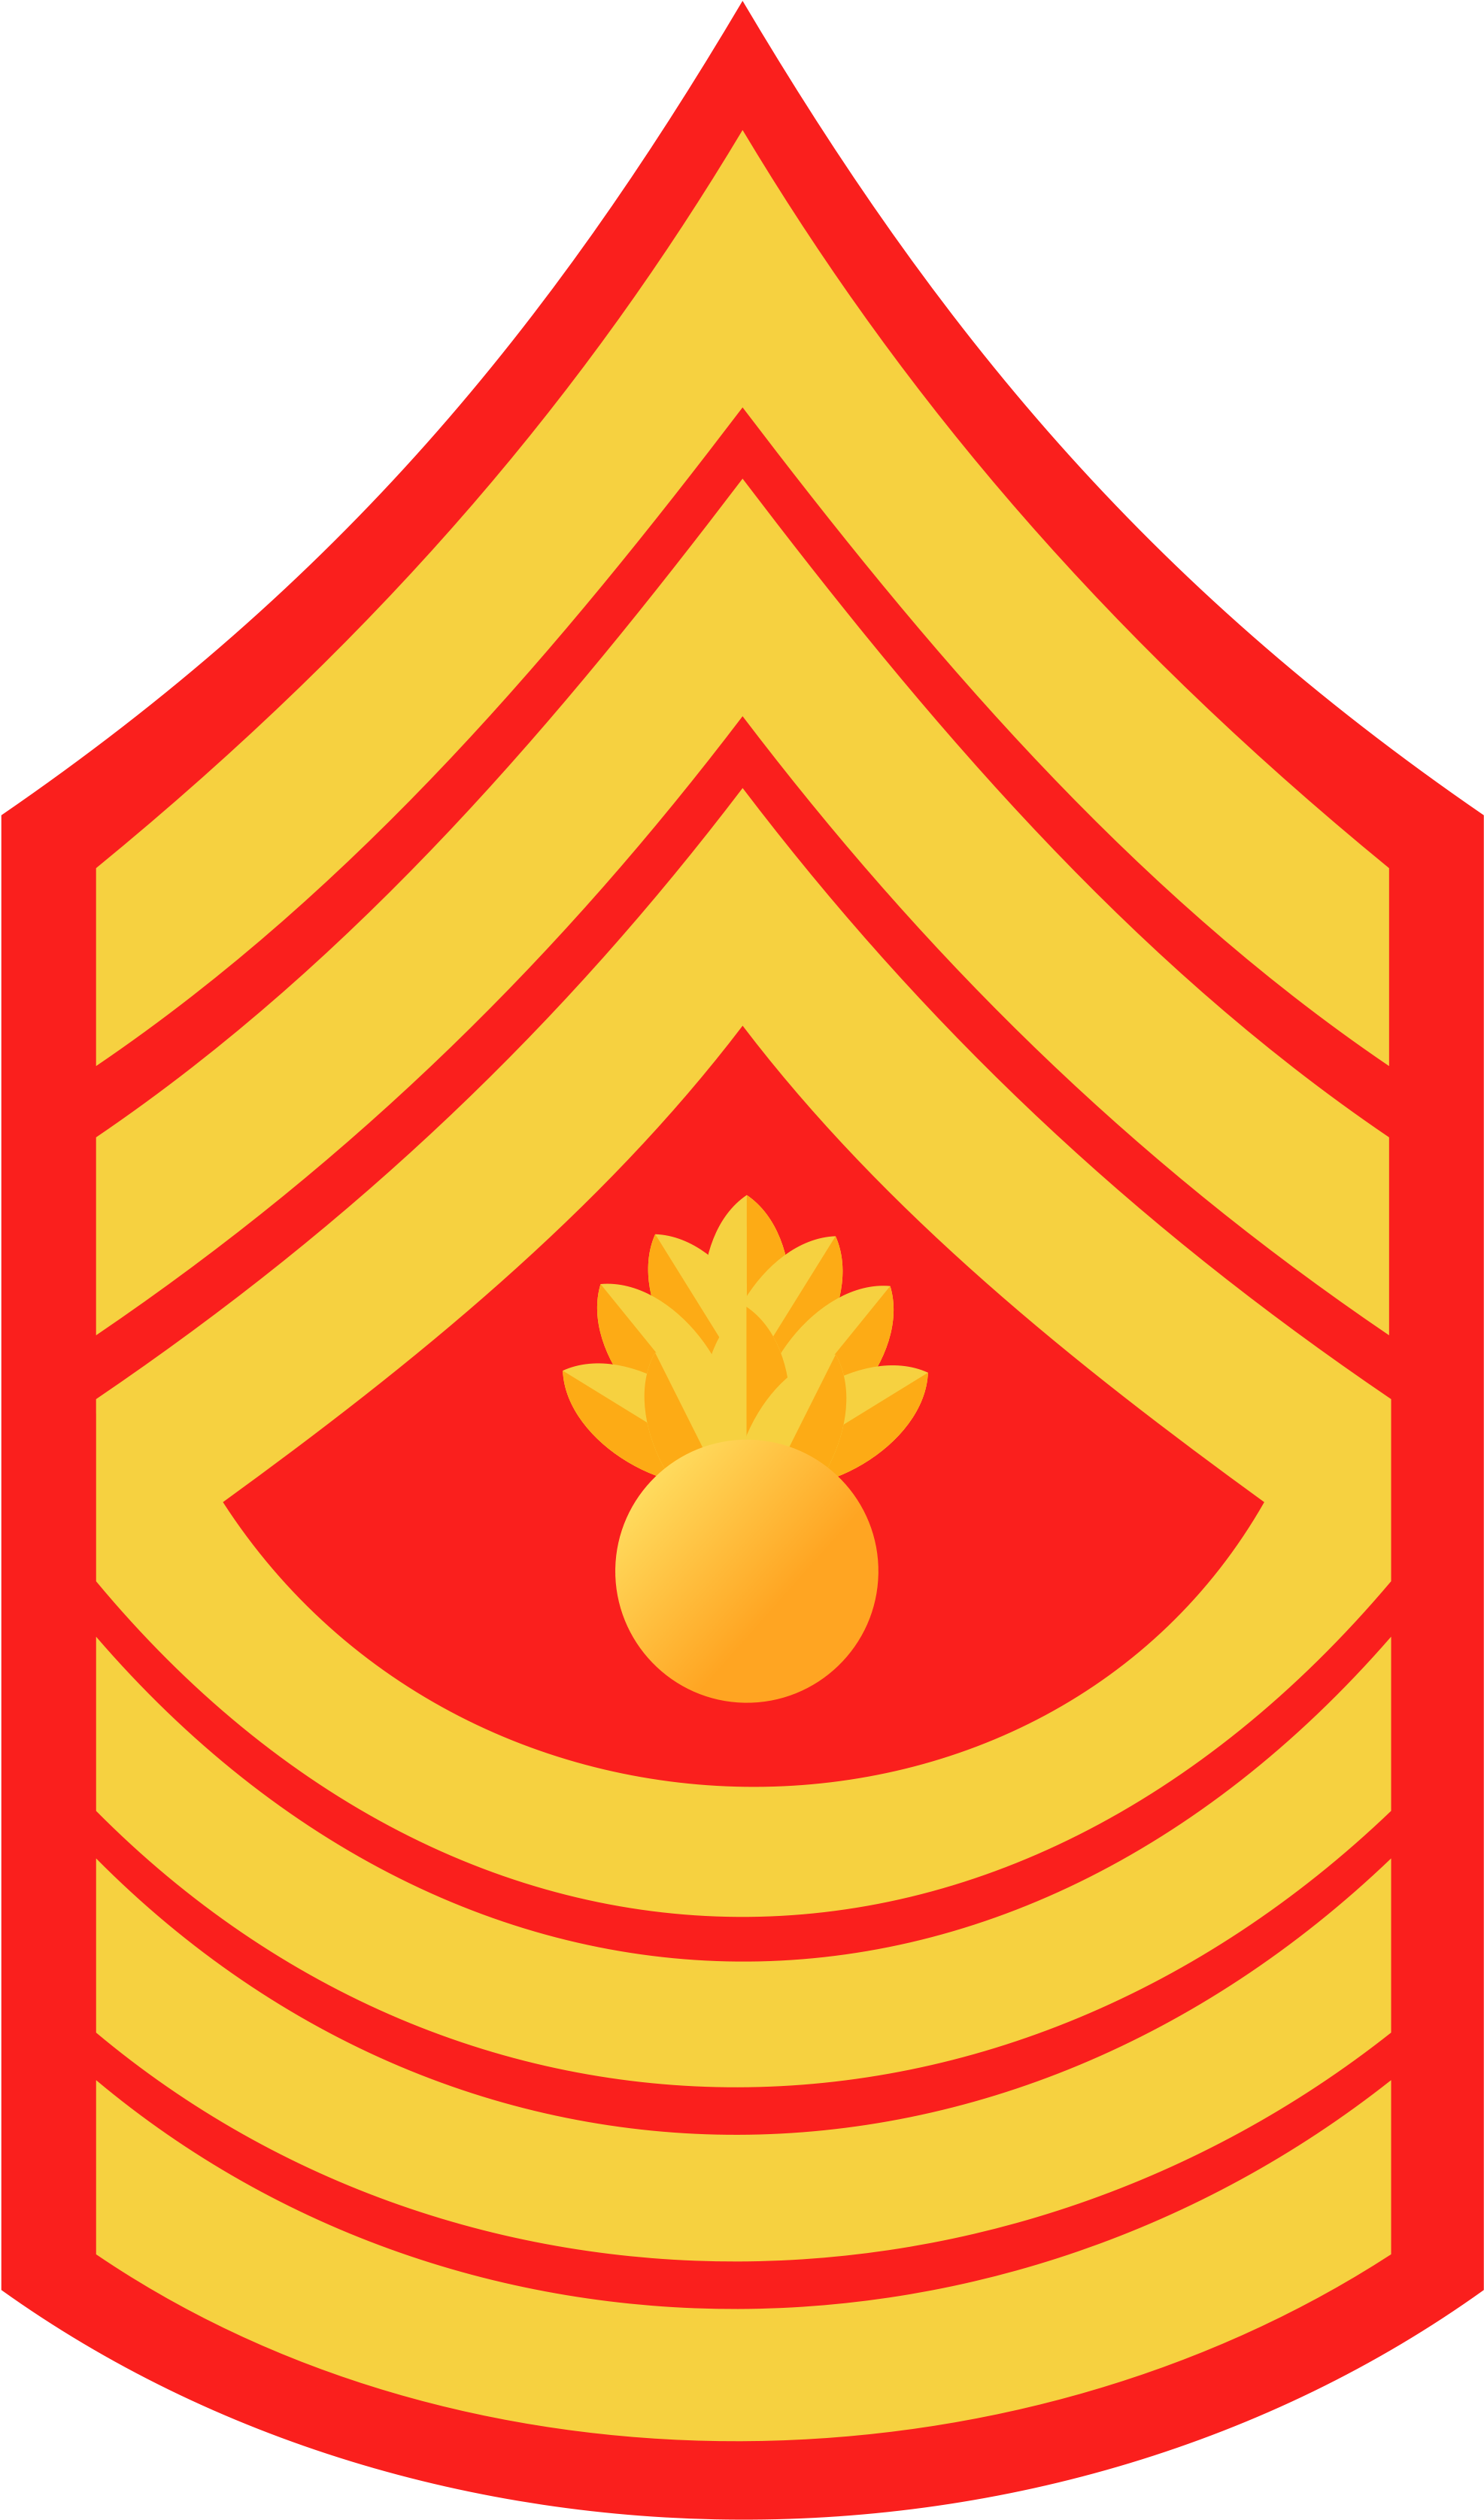 How To Draw A Police Badge 17, Buy Clip Art - Sergeant Major Of The Marine Corps Rank (2000x3379)